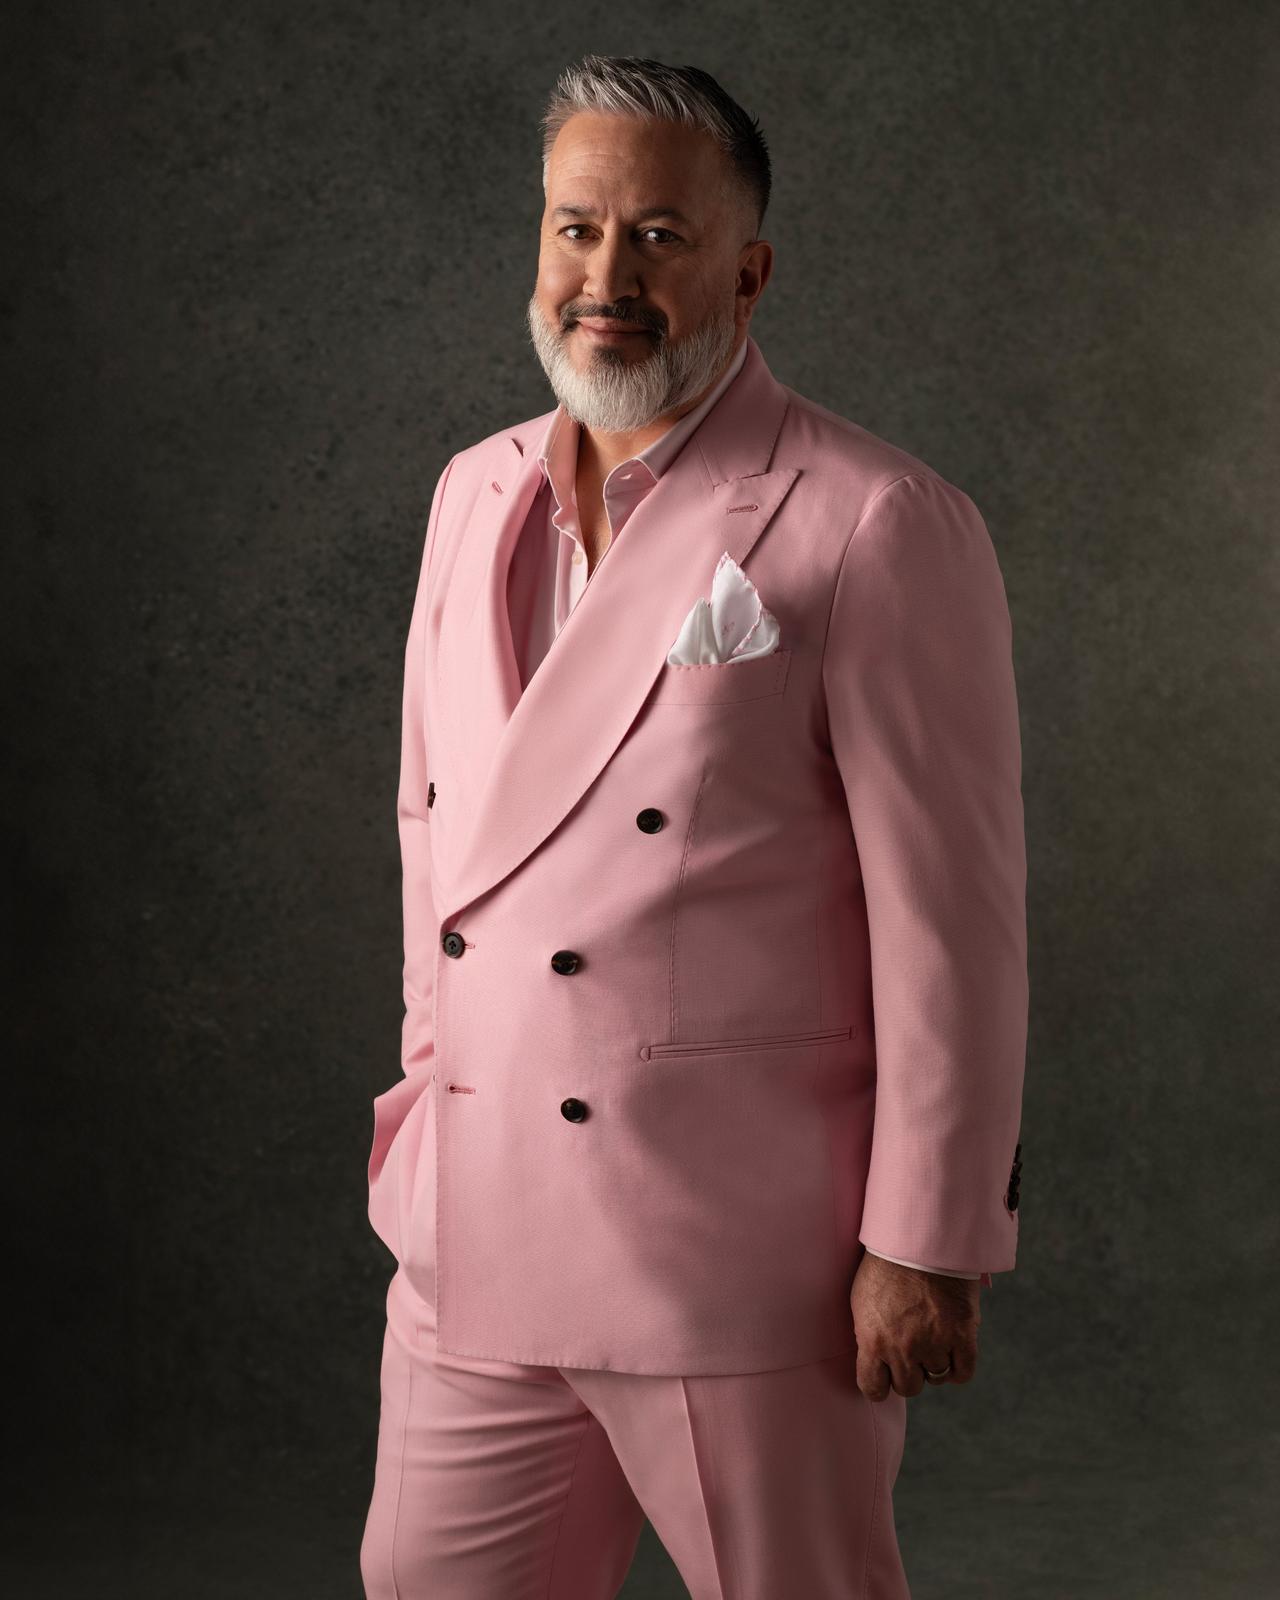 A man wearing a pink suit